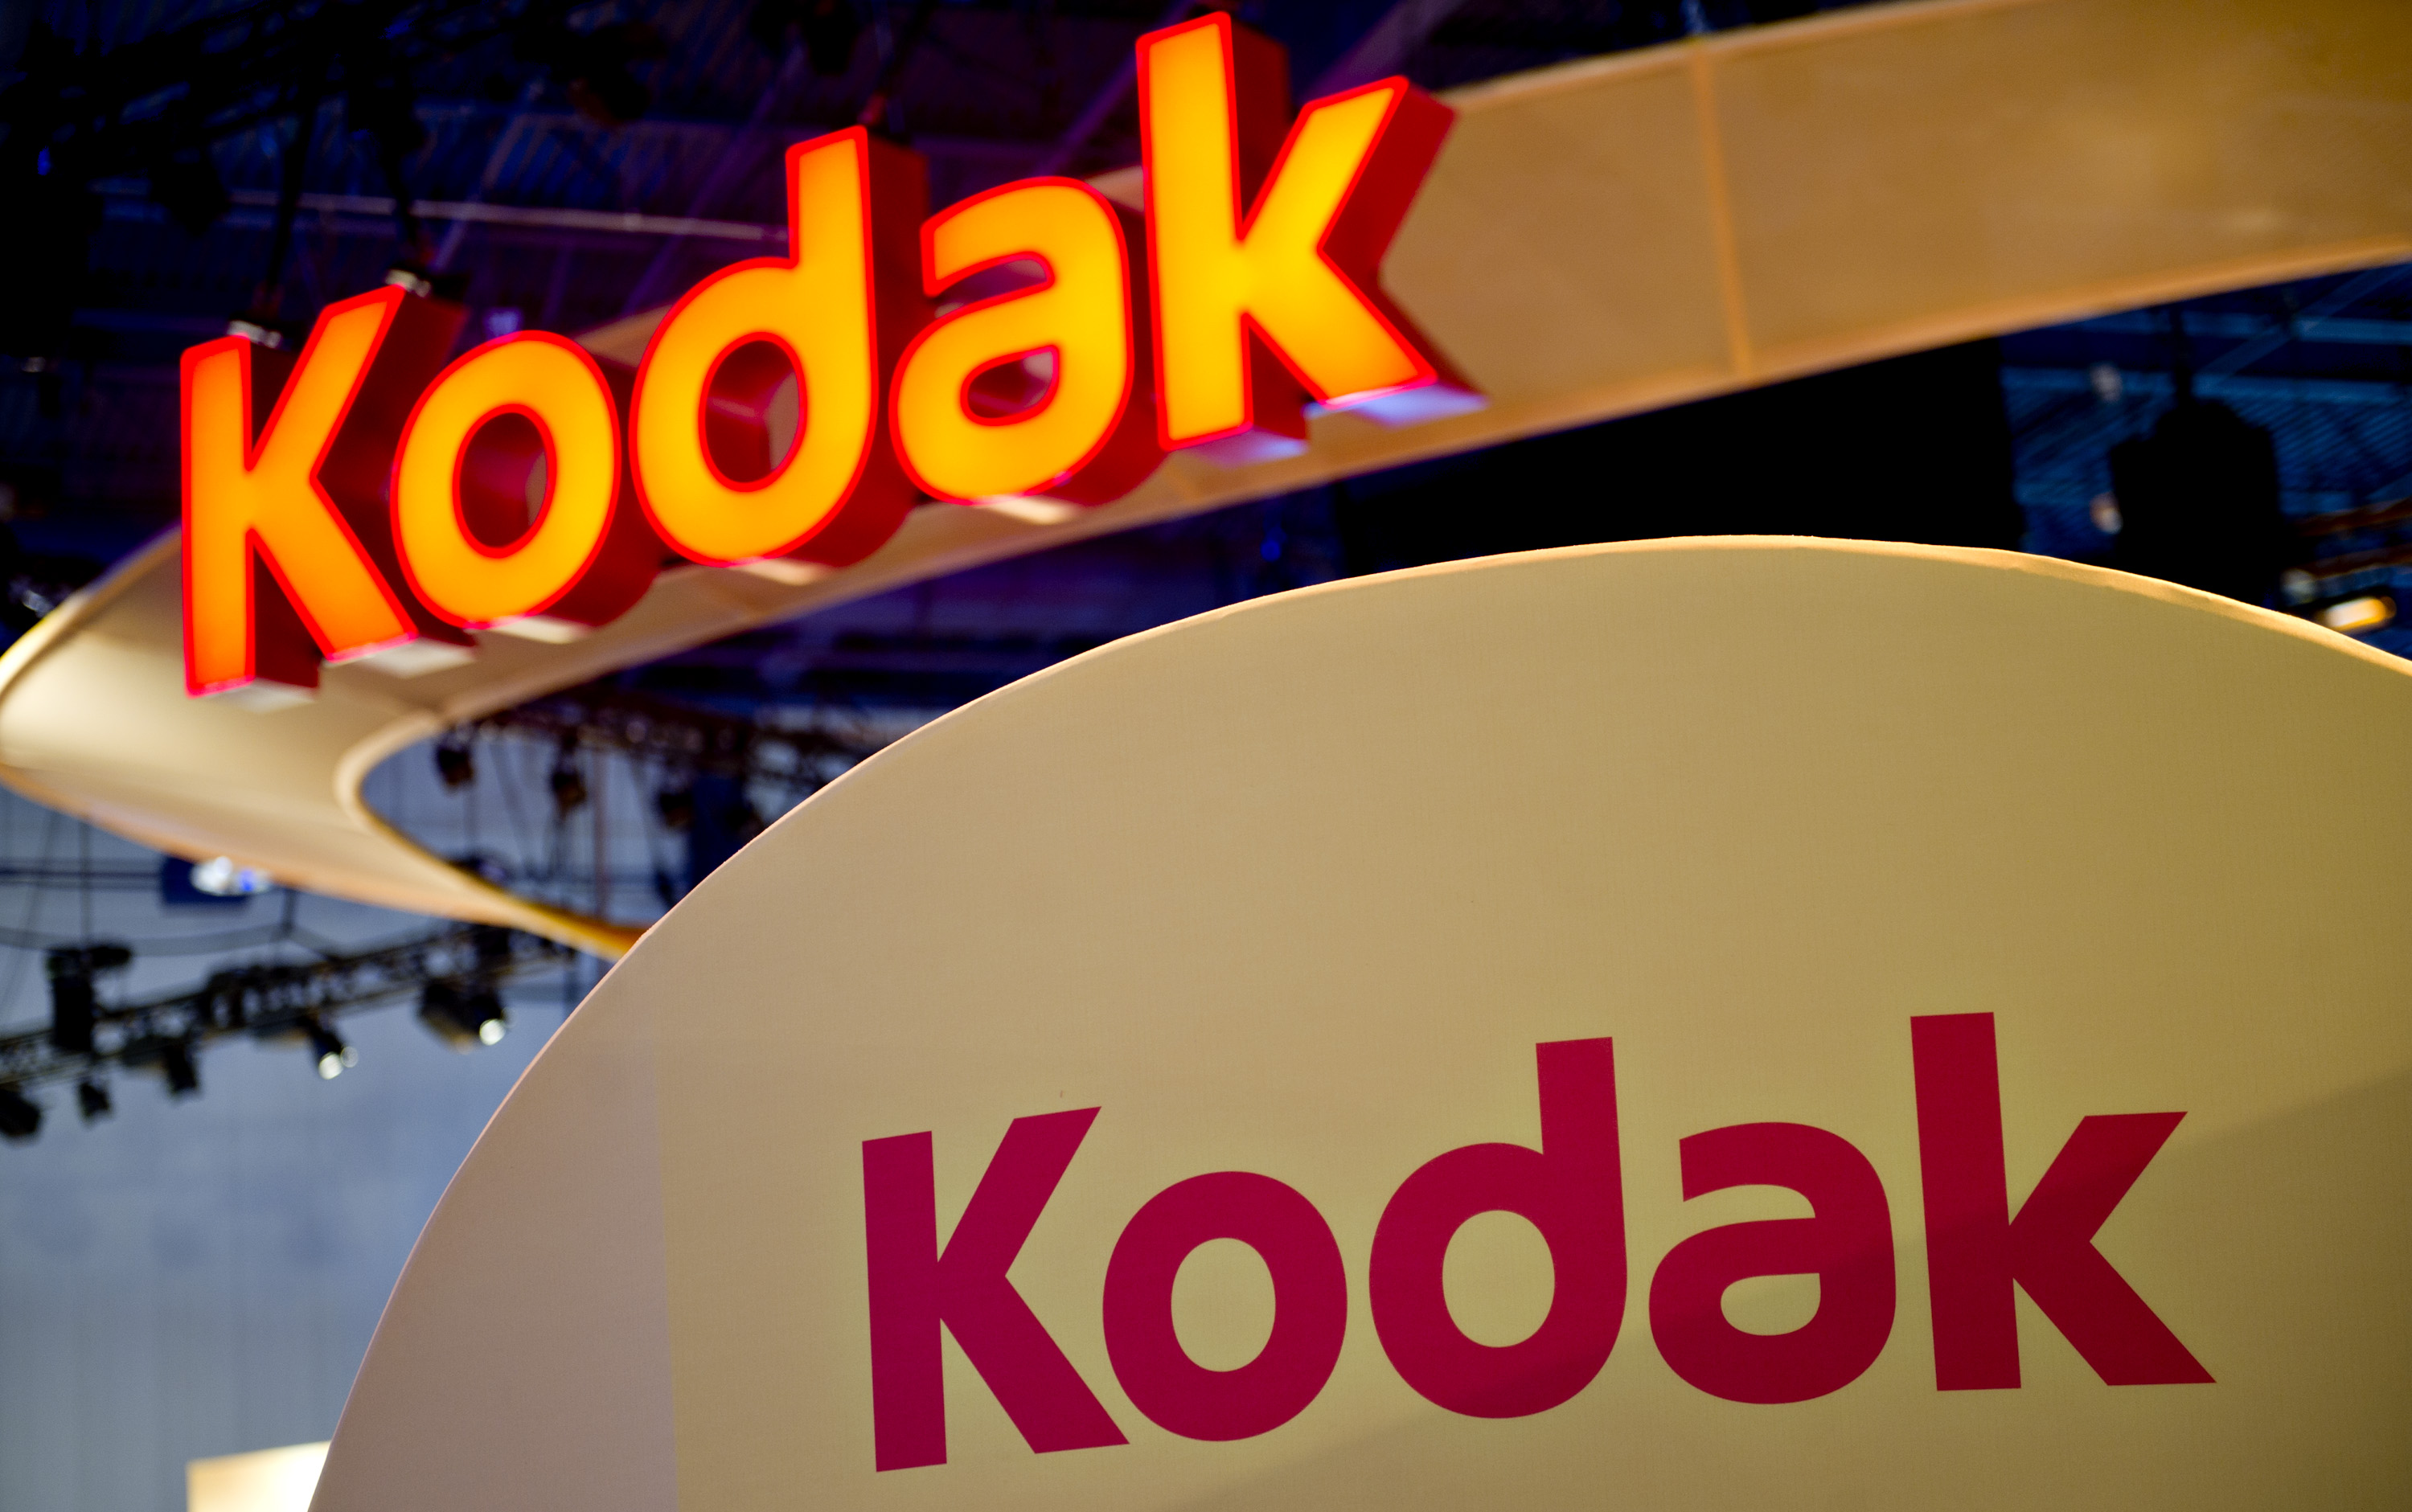 An Eastman Kodak Co. logo hangs above the company's booth at the 2012 International Consumer Electronics Show (CES) in Las Vegas, Nevada, U.S., on Thursday, Jan. 12, 2012. (Bloomberg—Bloomberg via Getty Images)